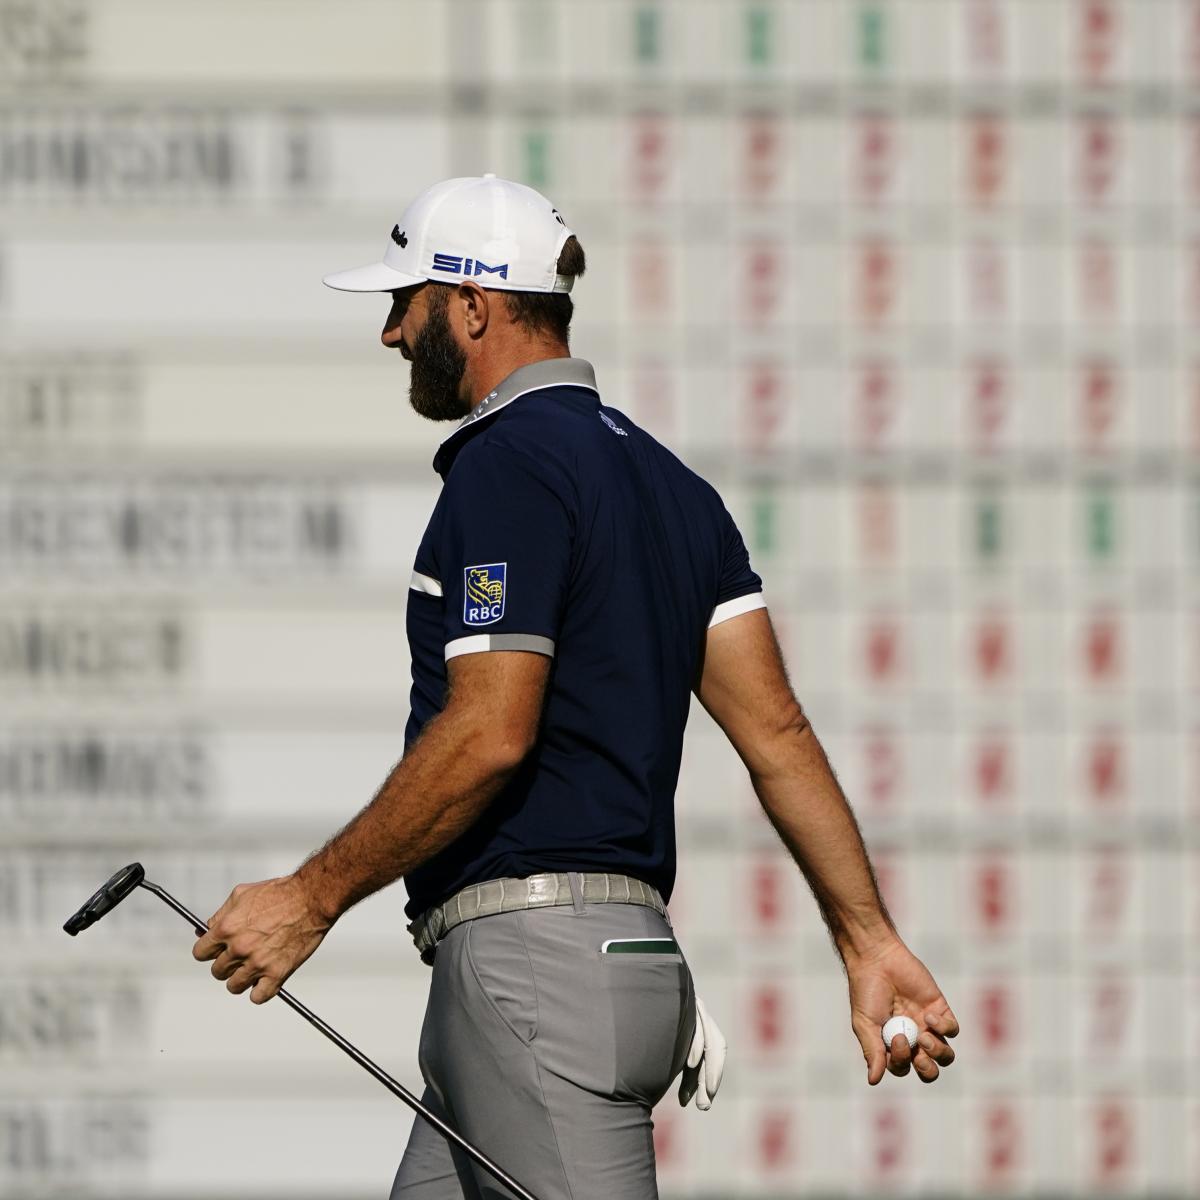 Masters Tournament 2020 Mobile Updates for Saturday Leaderboard Scores